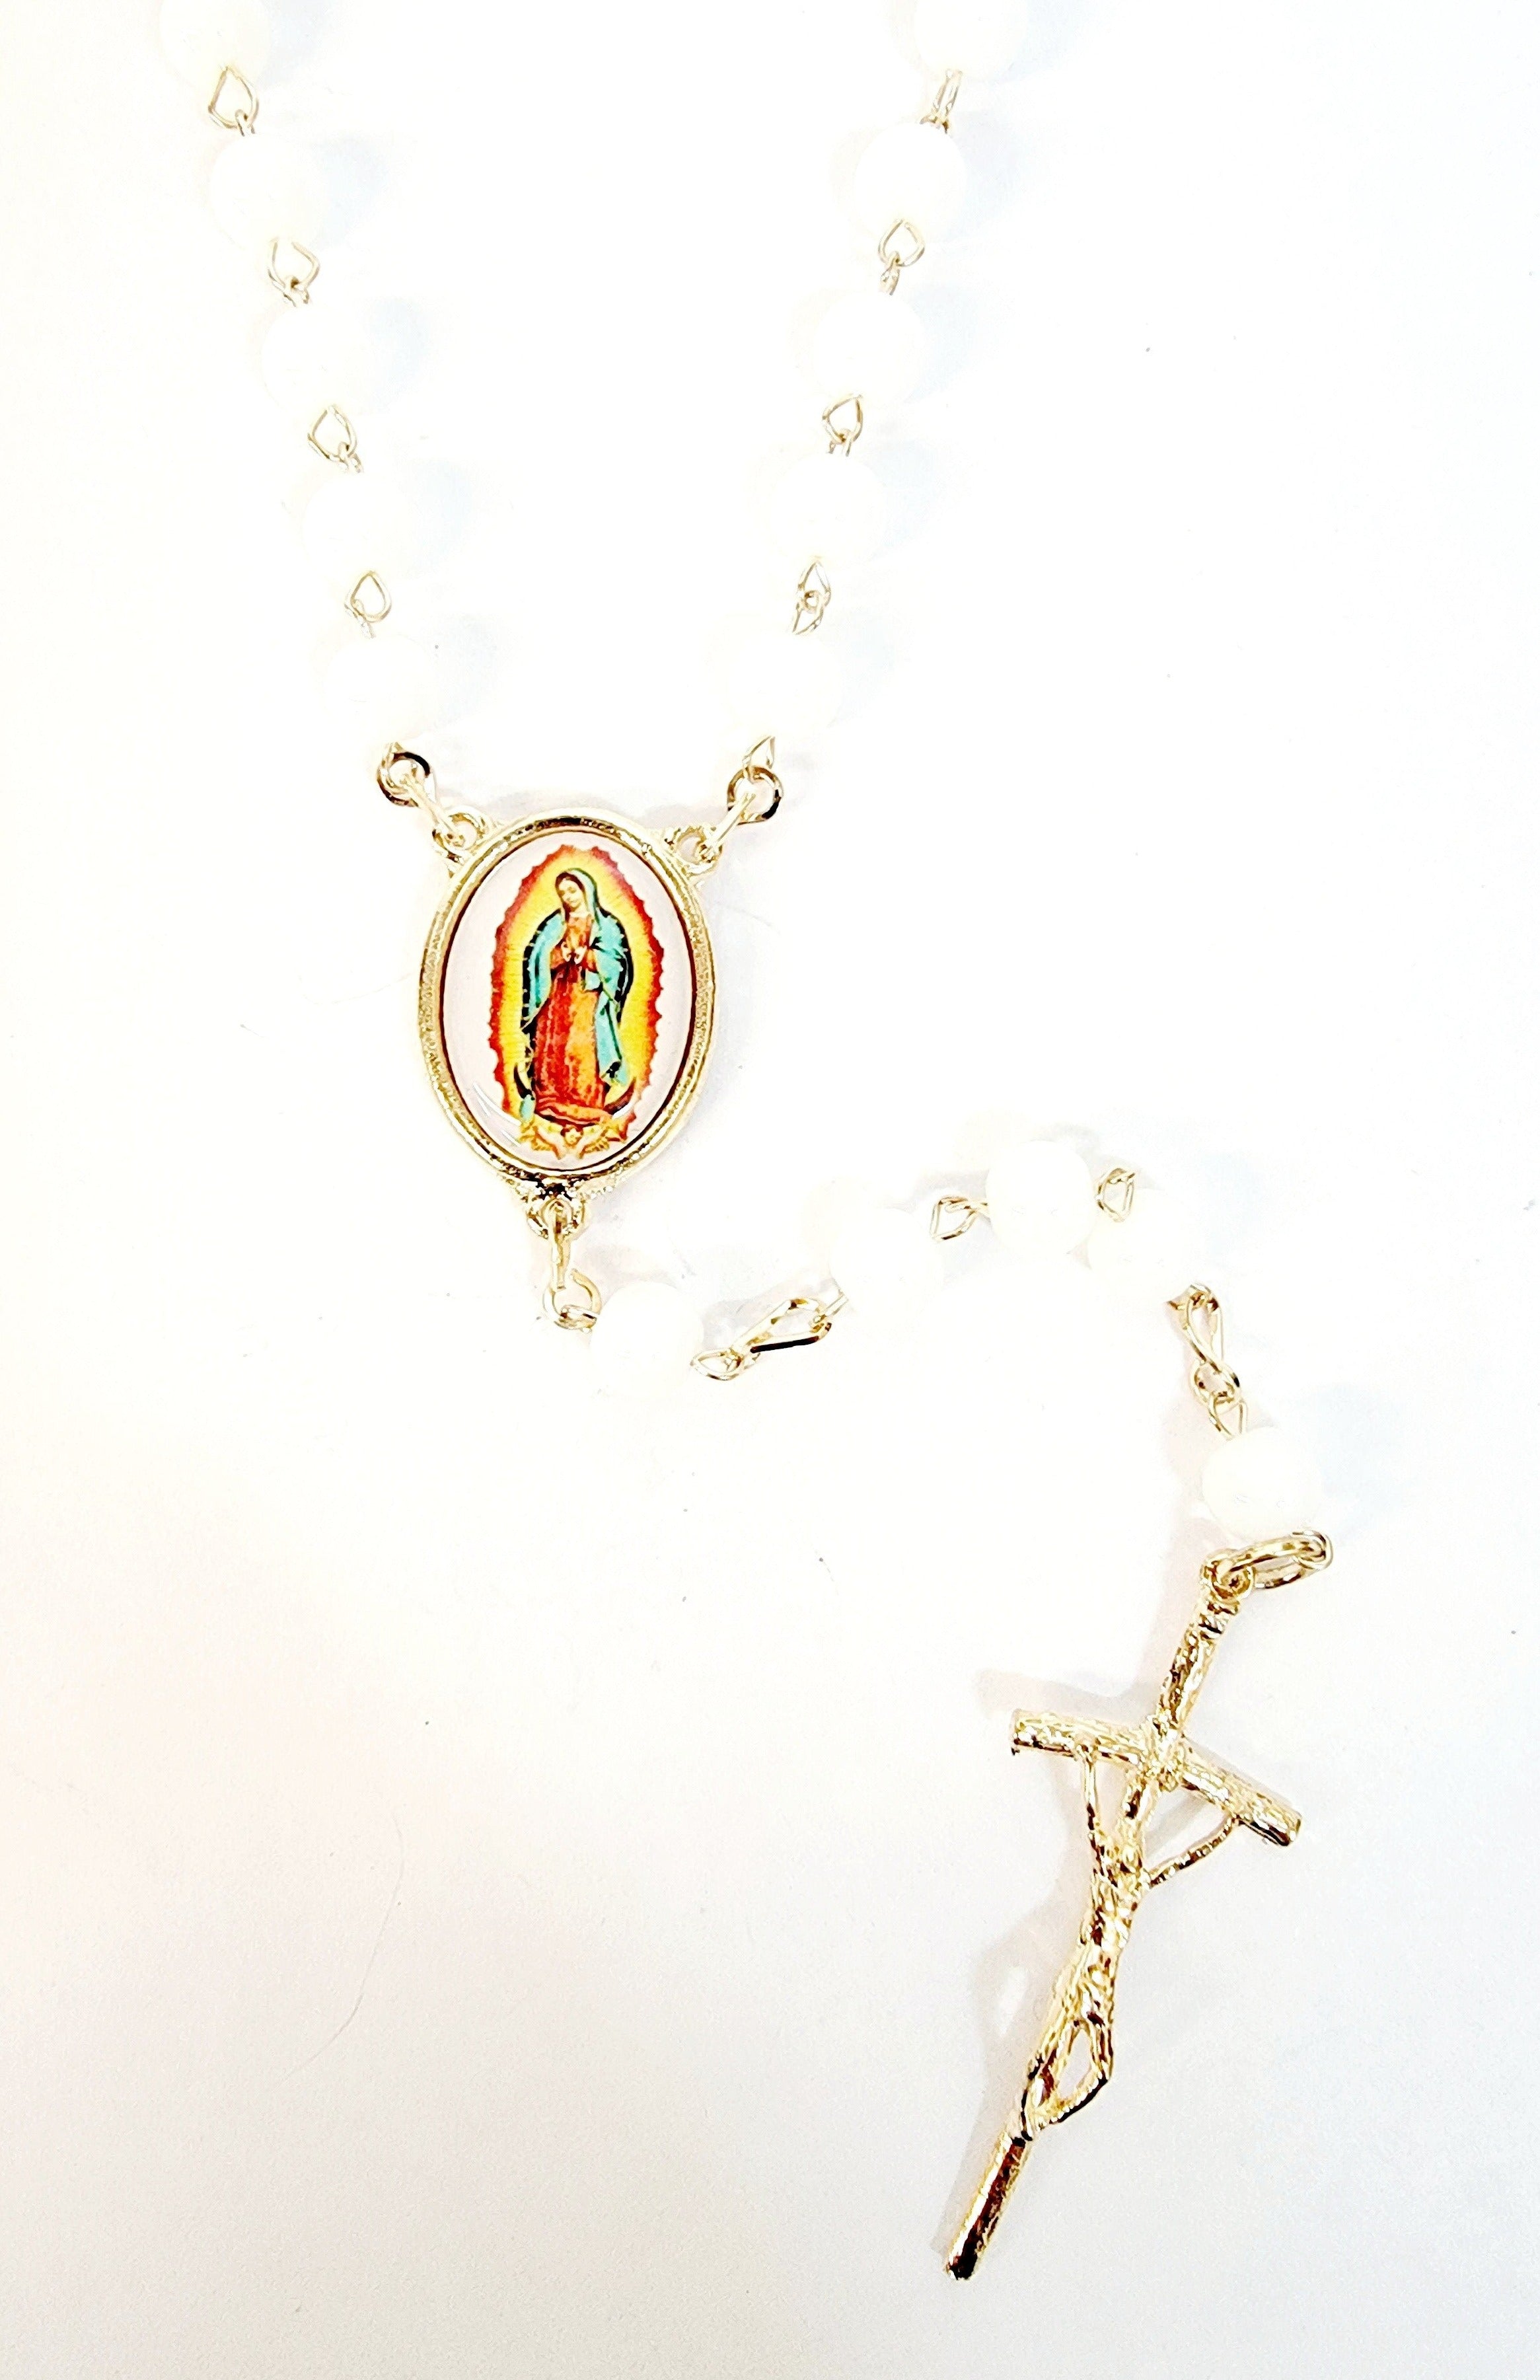 Our Lady of Guadalupe White Pearl Rosary